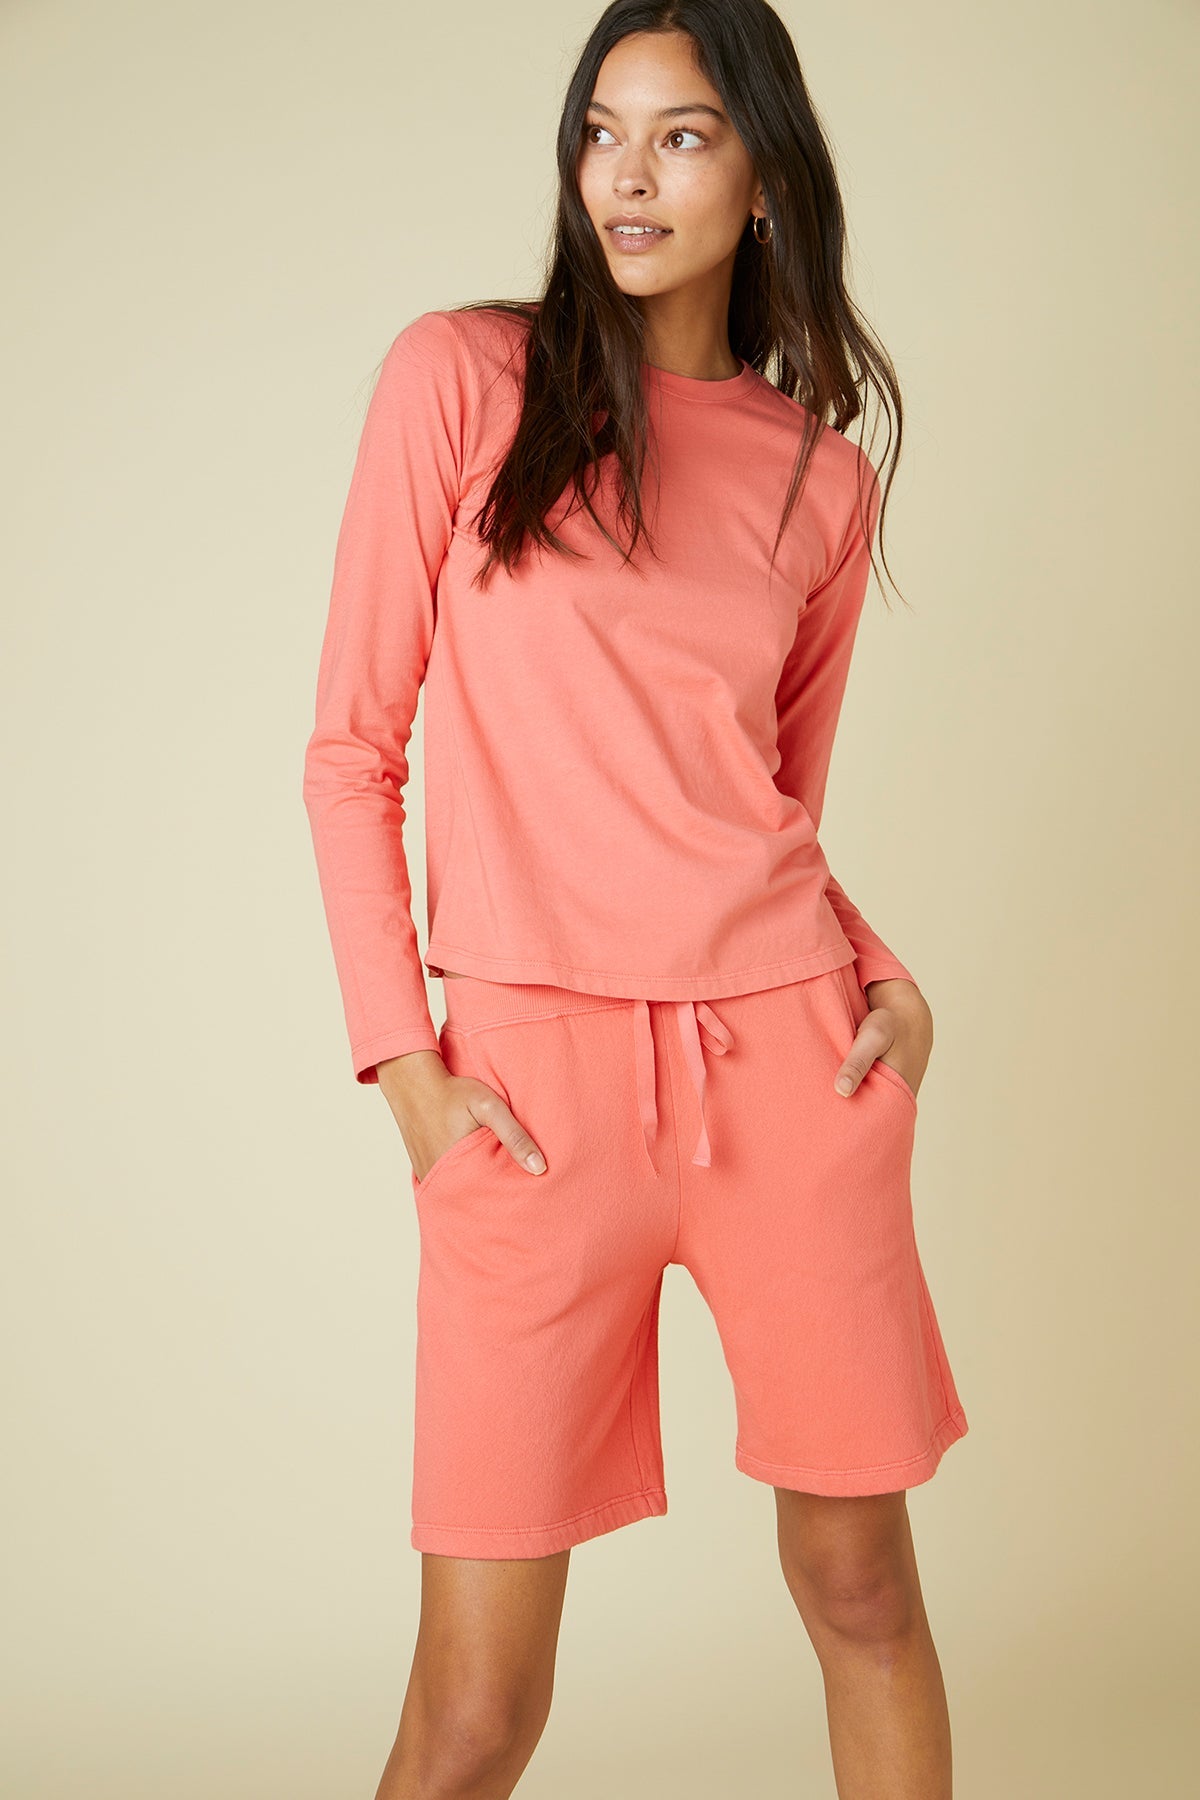   The model is wearing a coral long-sleeved top and Velvet by Jenny Graham Laguna Sweatshorts. 